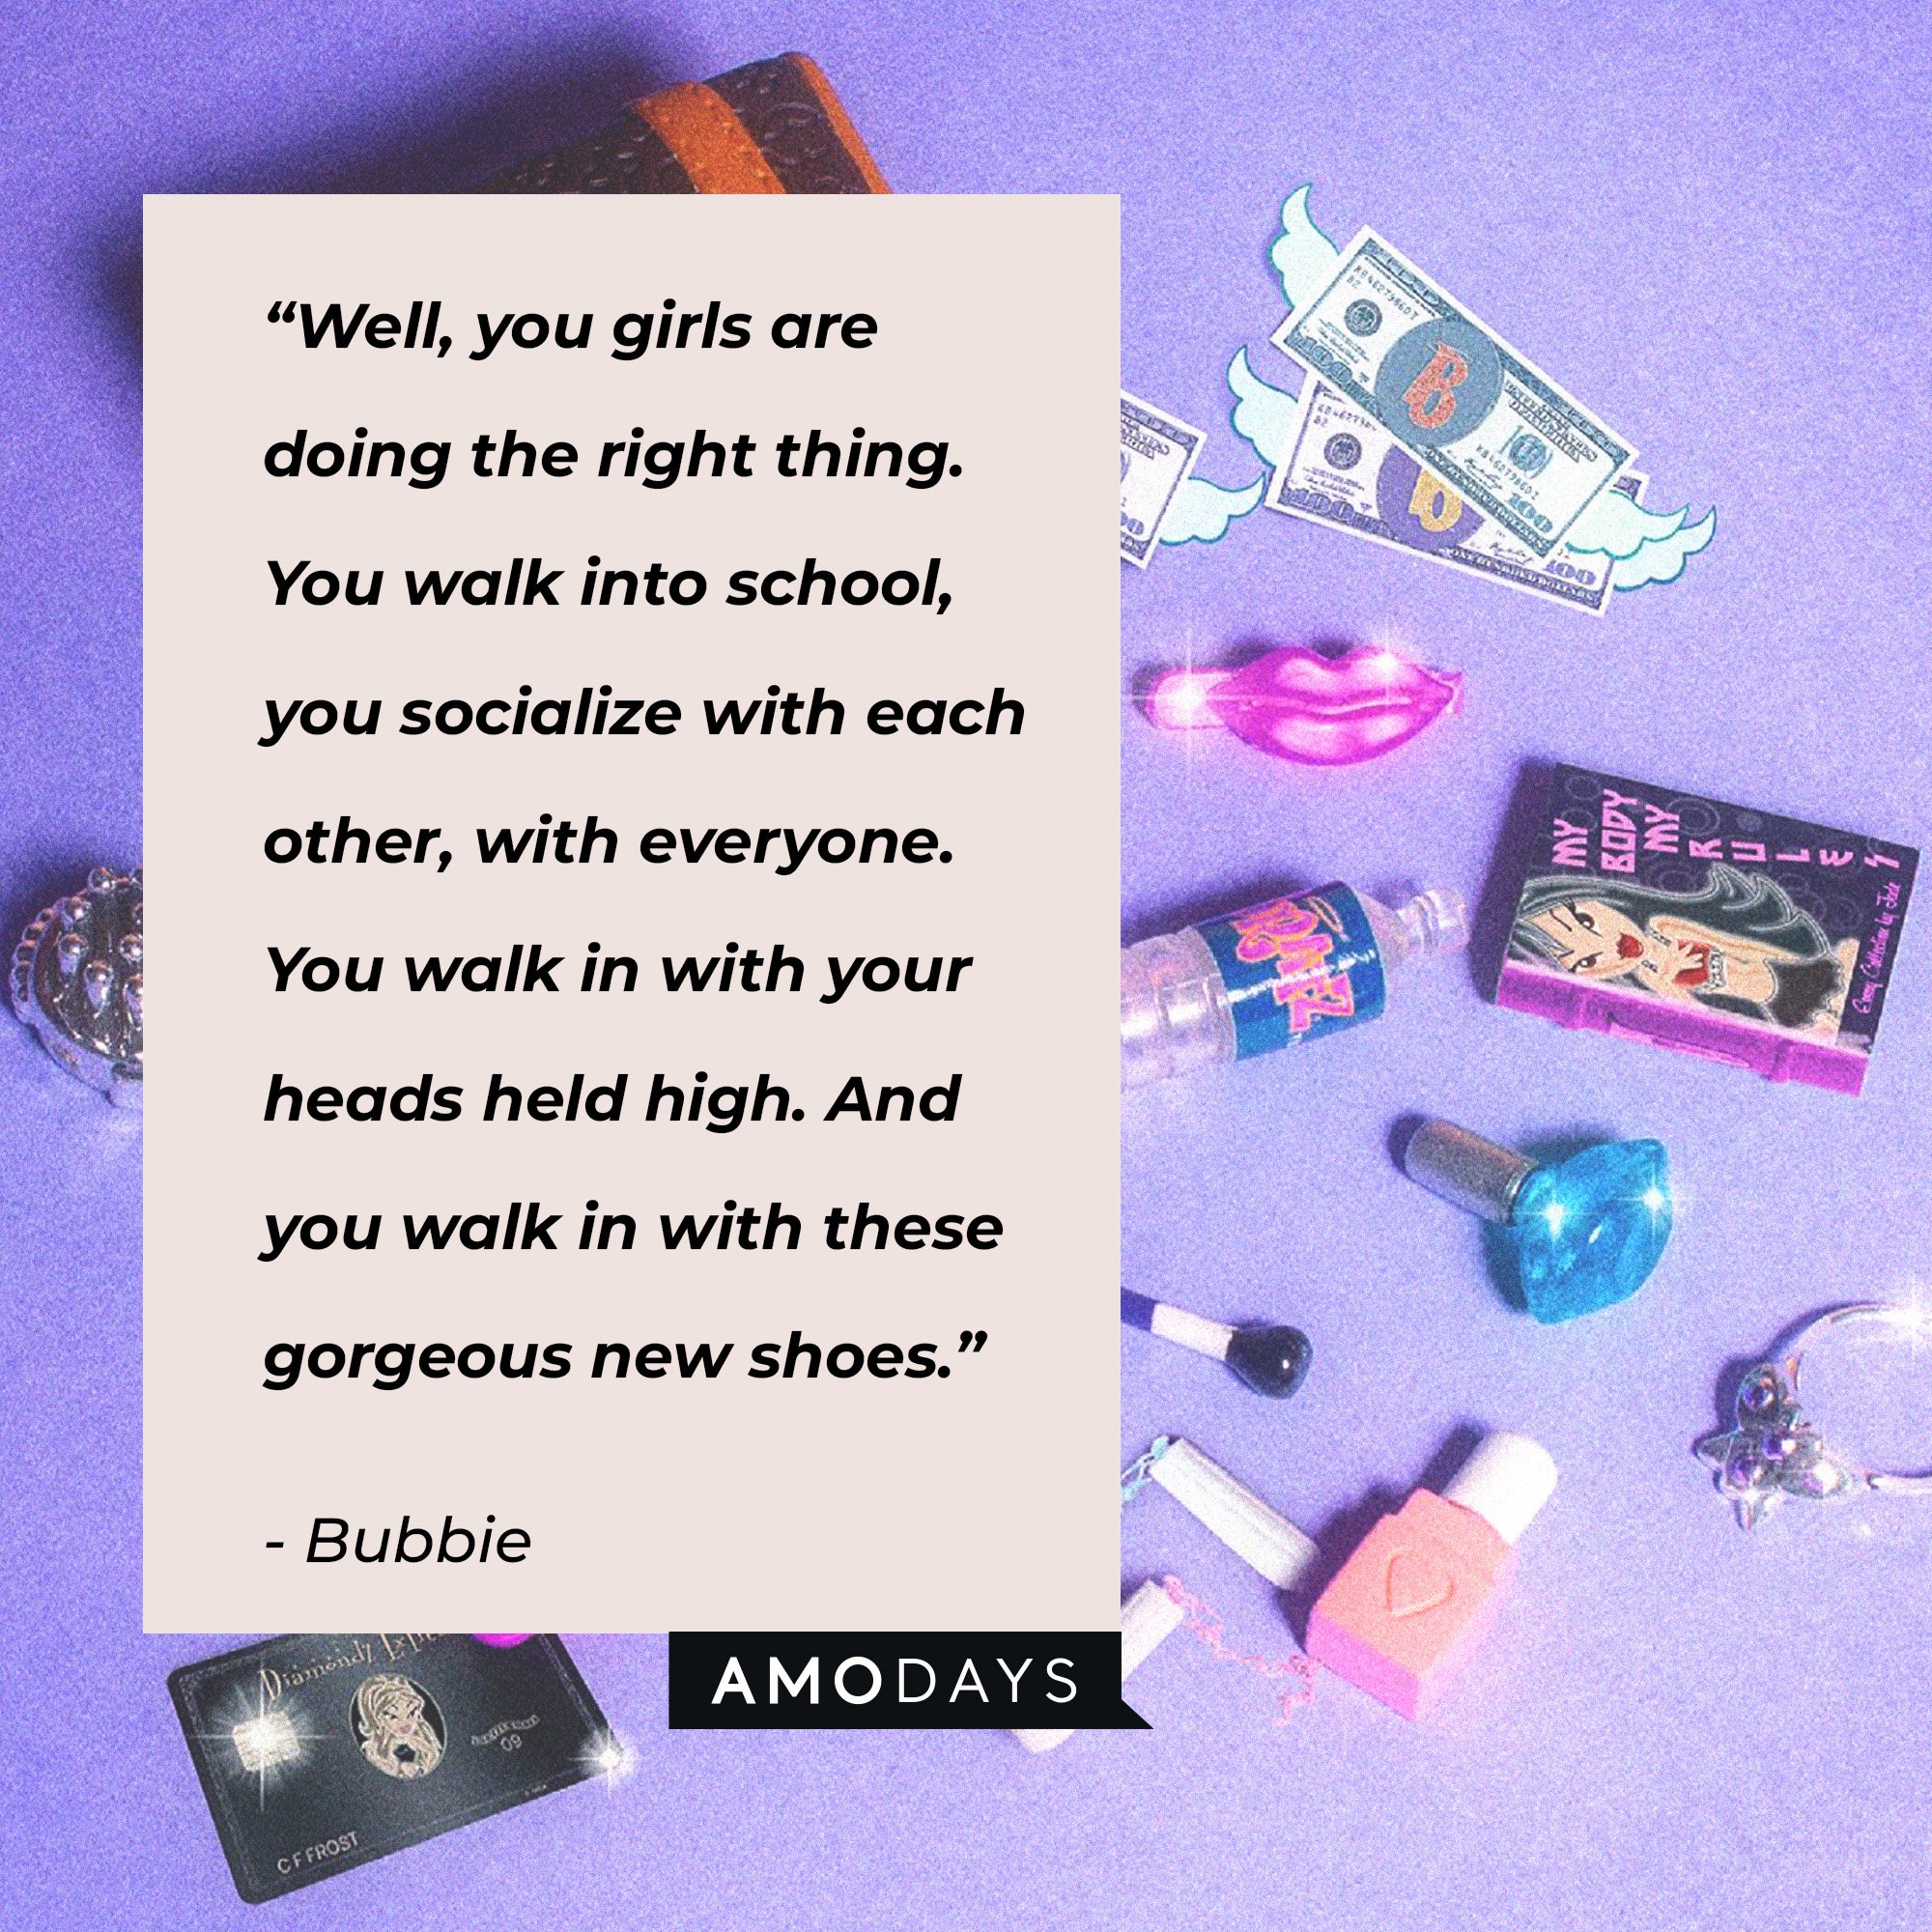  Bubbie's quote: “Well, you girls are doing the right thing. You walk into school, you socialize with each other, with everyone. You walk in with your heads held high. And you walk in with these gorgeous new shoes.” | Image: AmoDays